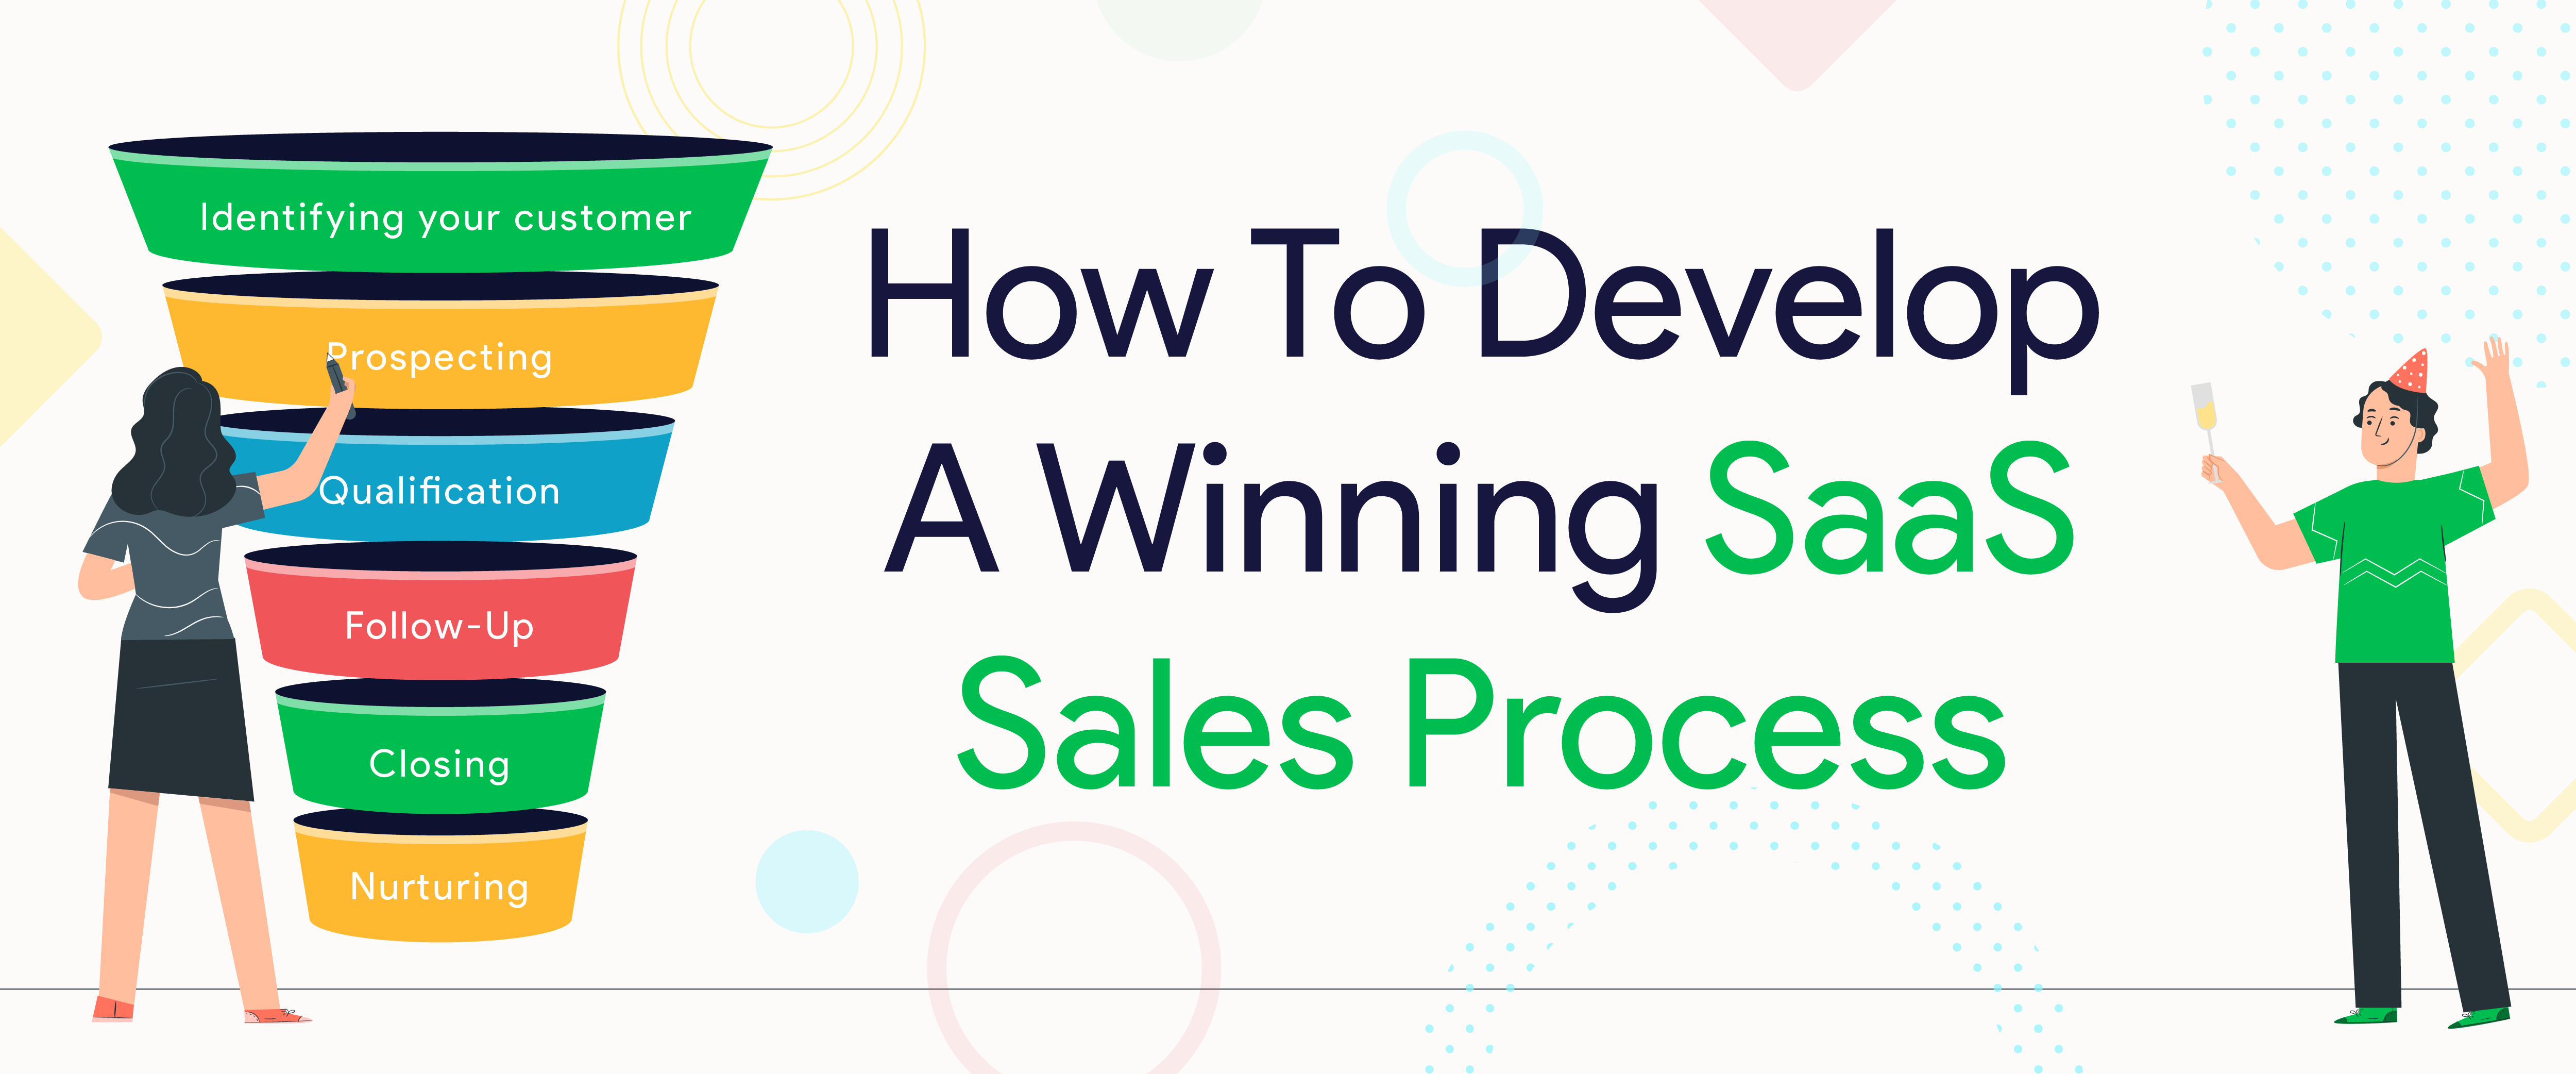 How To Develop A Winning Sales Process For Your SaaS Business